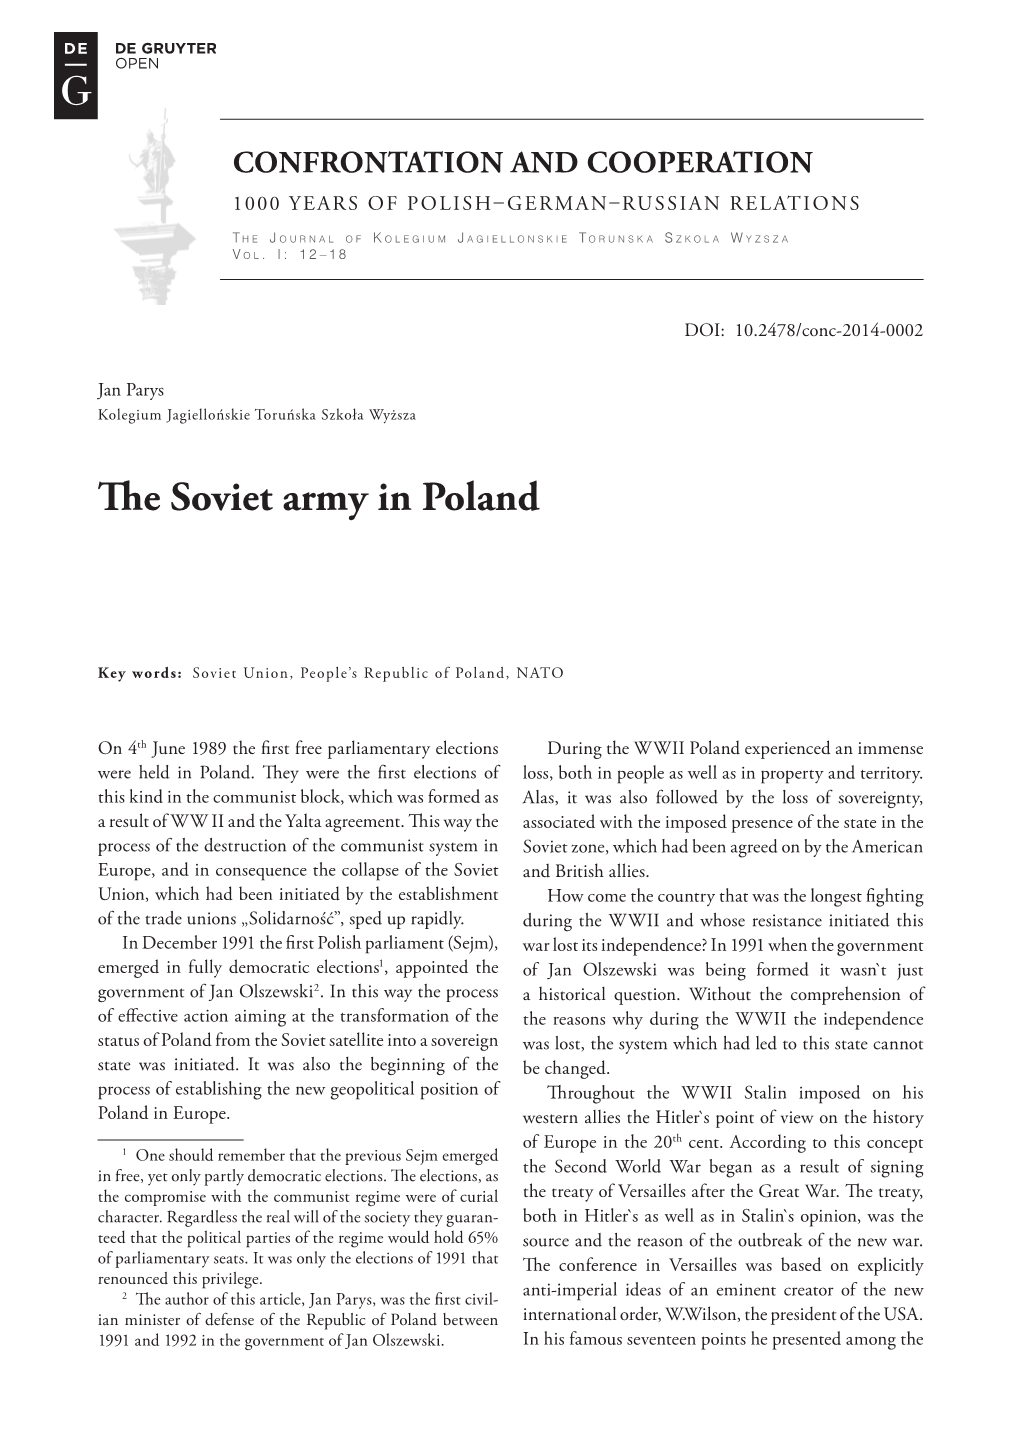 The Soviet Army in Poland